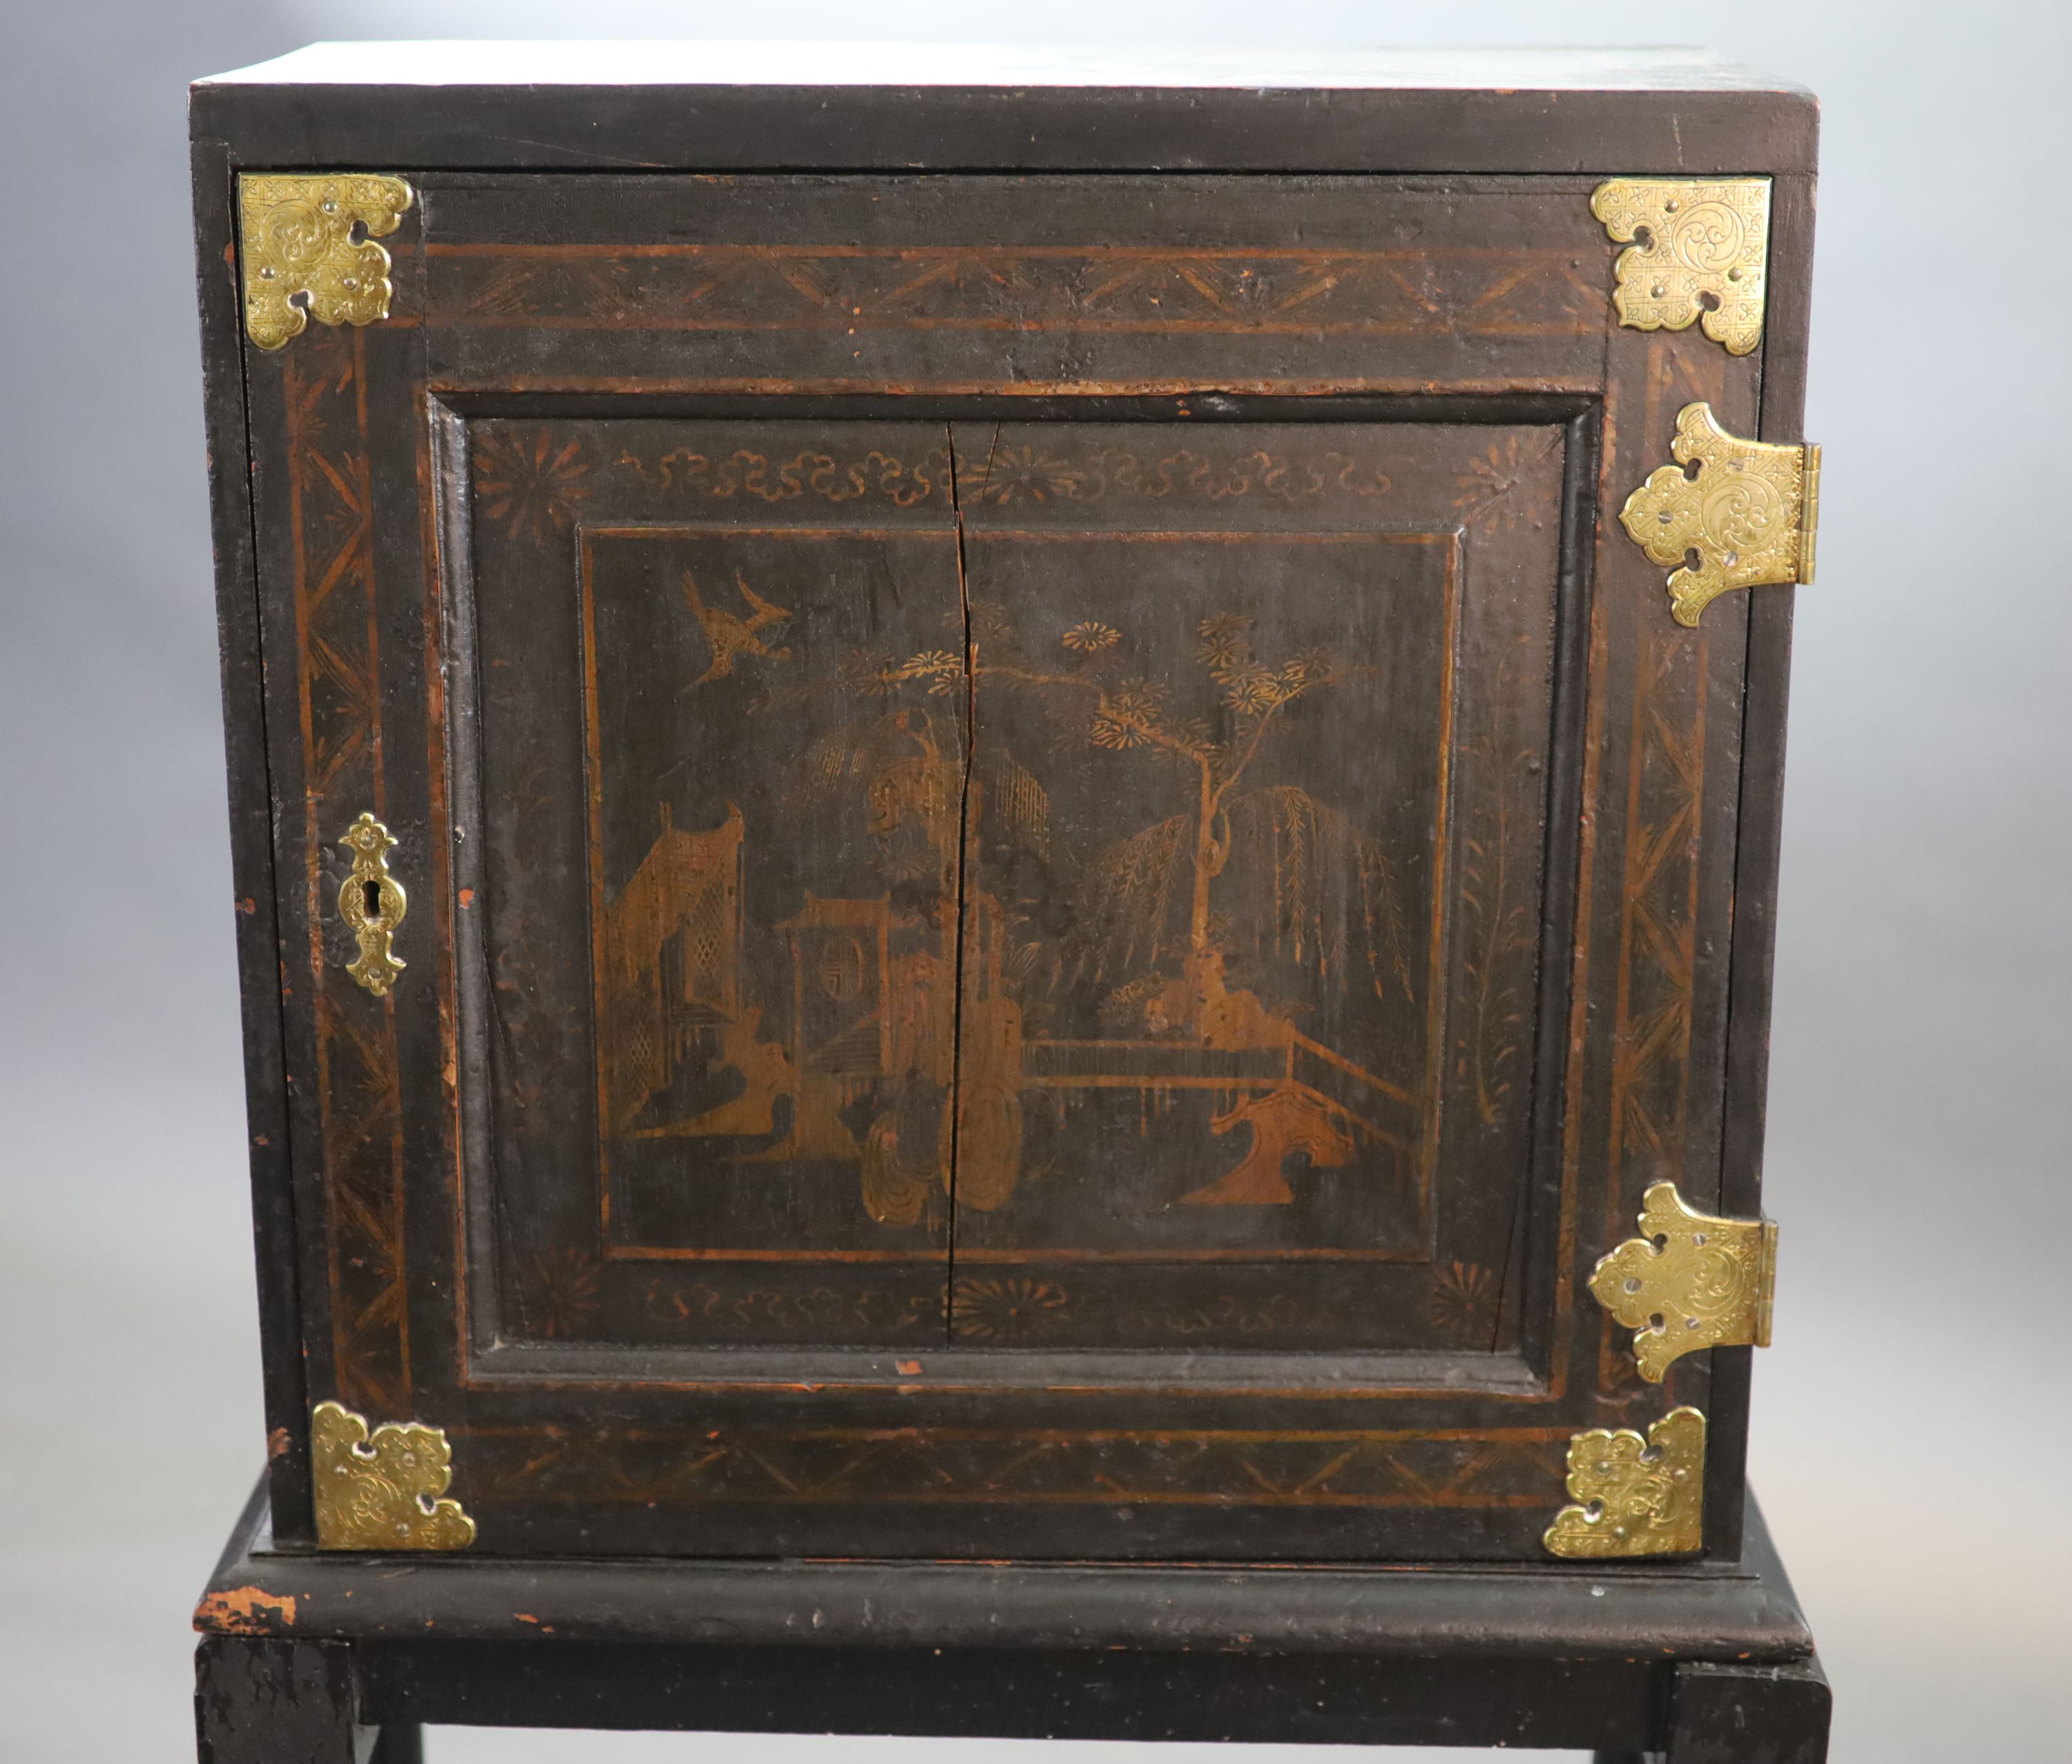 An early 18th century European japanned cabinet on stand, W.54cm D.24cm H.115.5cm